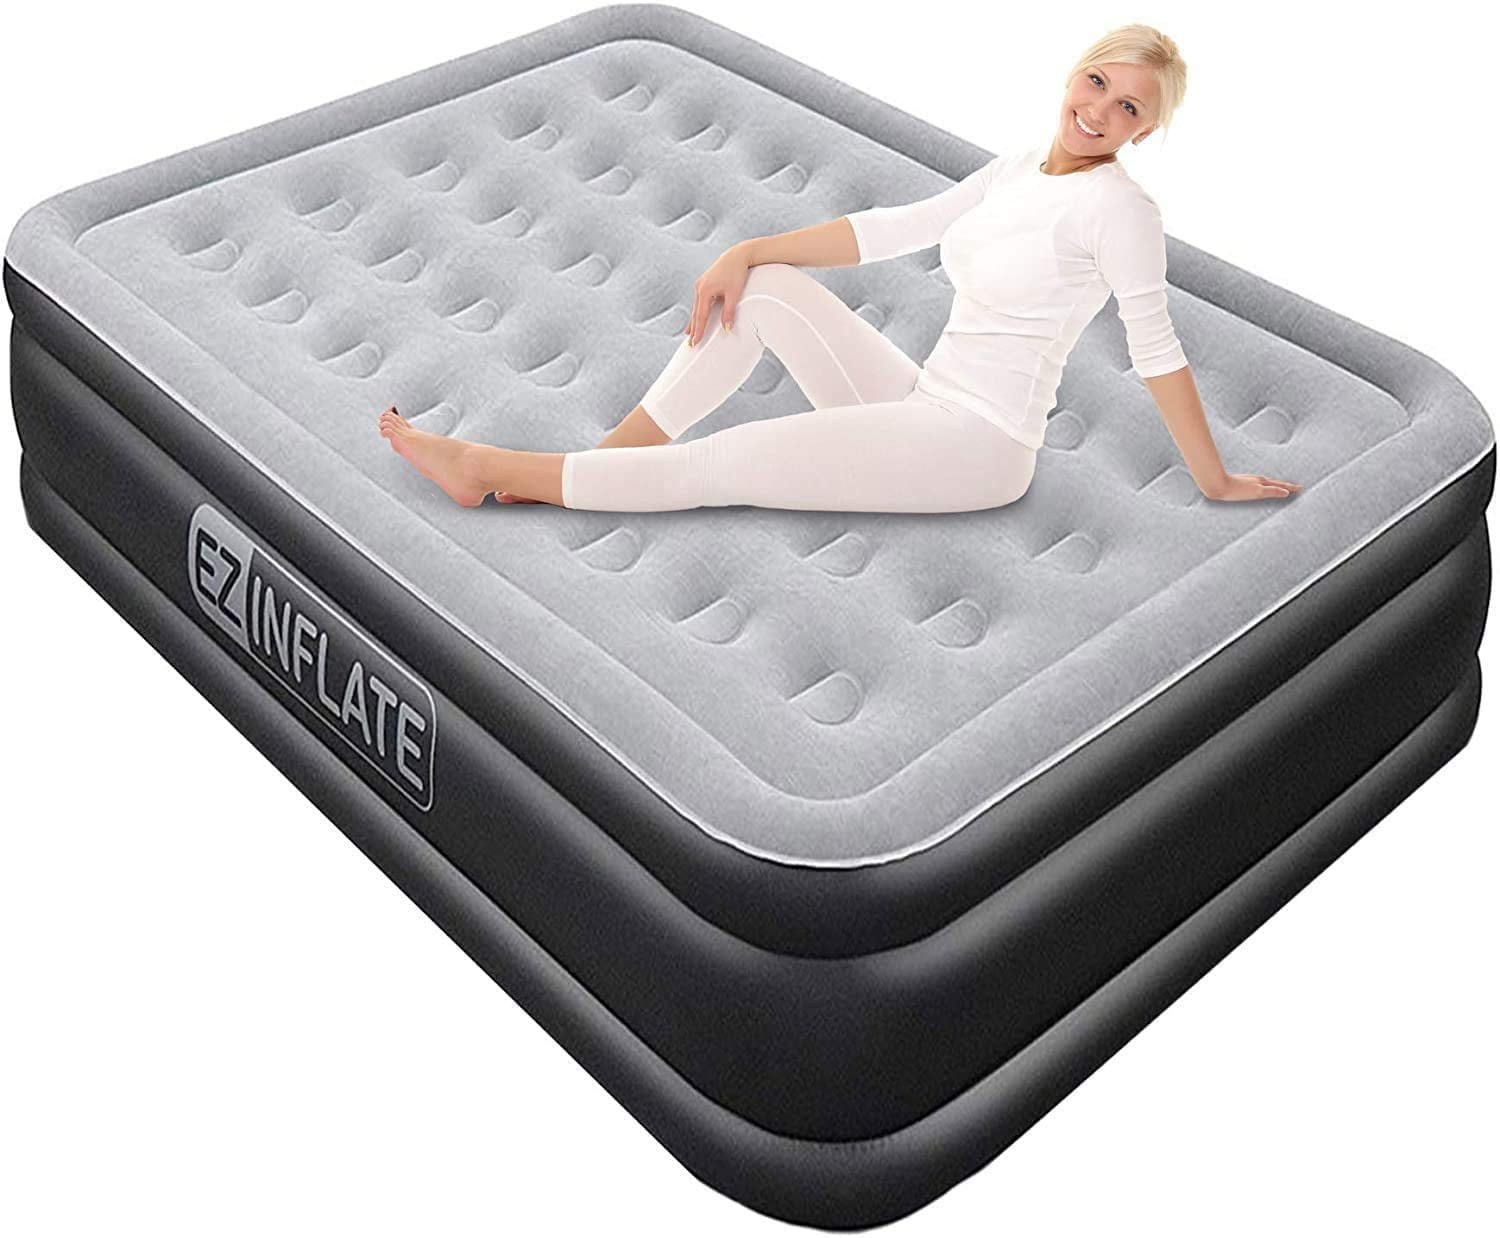 Double Inflatable Flocked Air Beds Camping Mattress Airbed FREE Electric Pump 